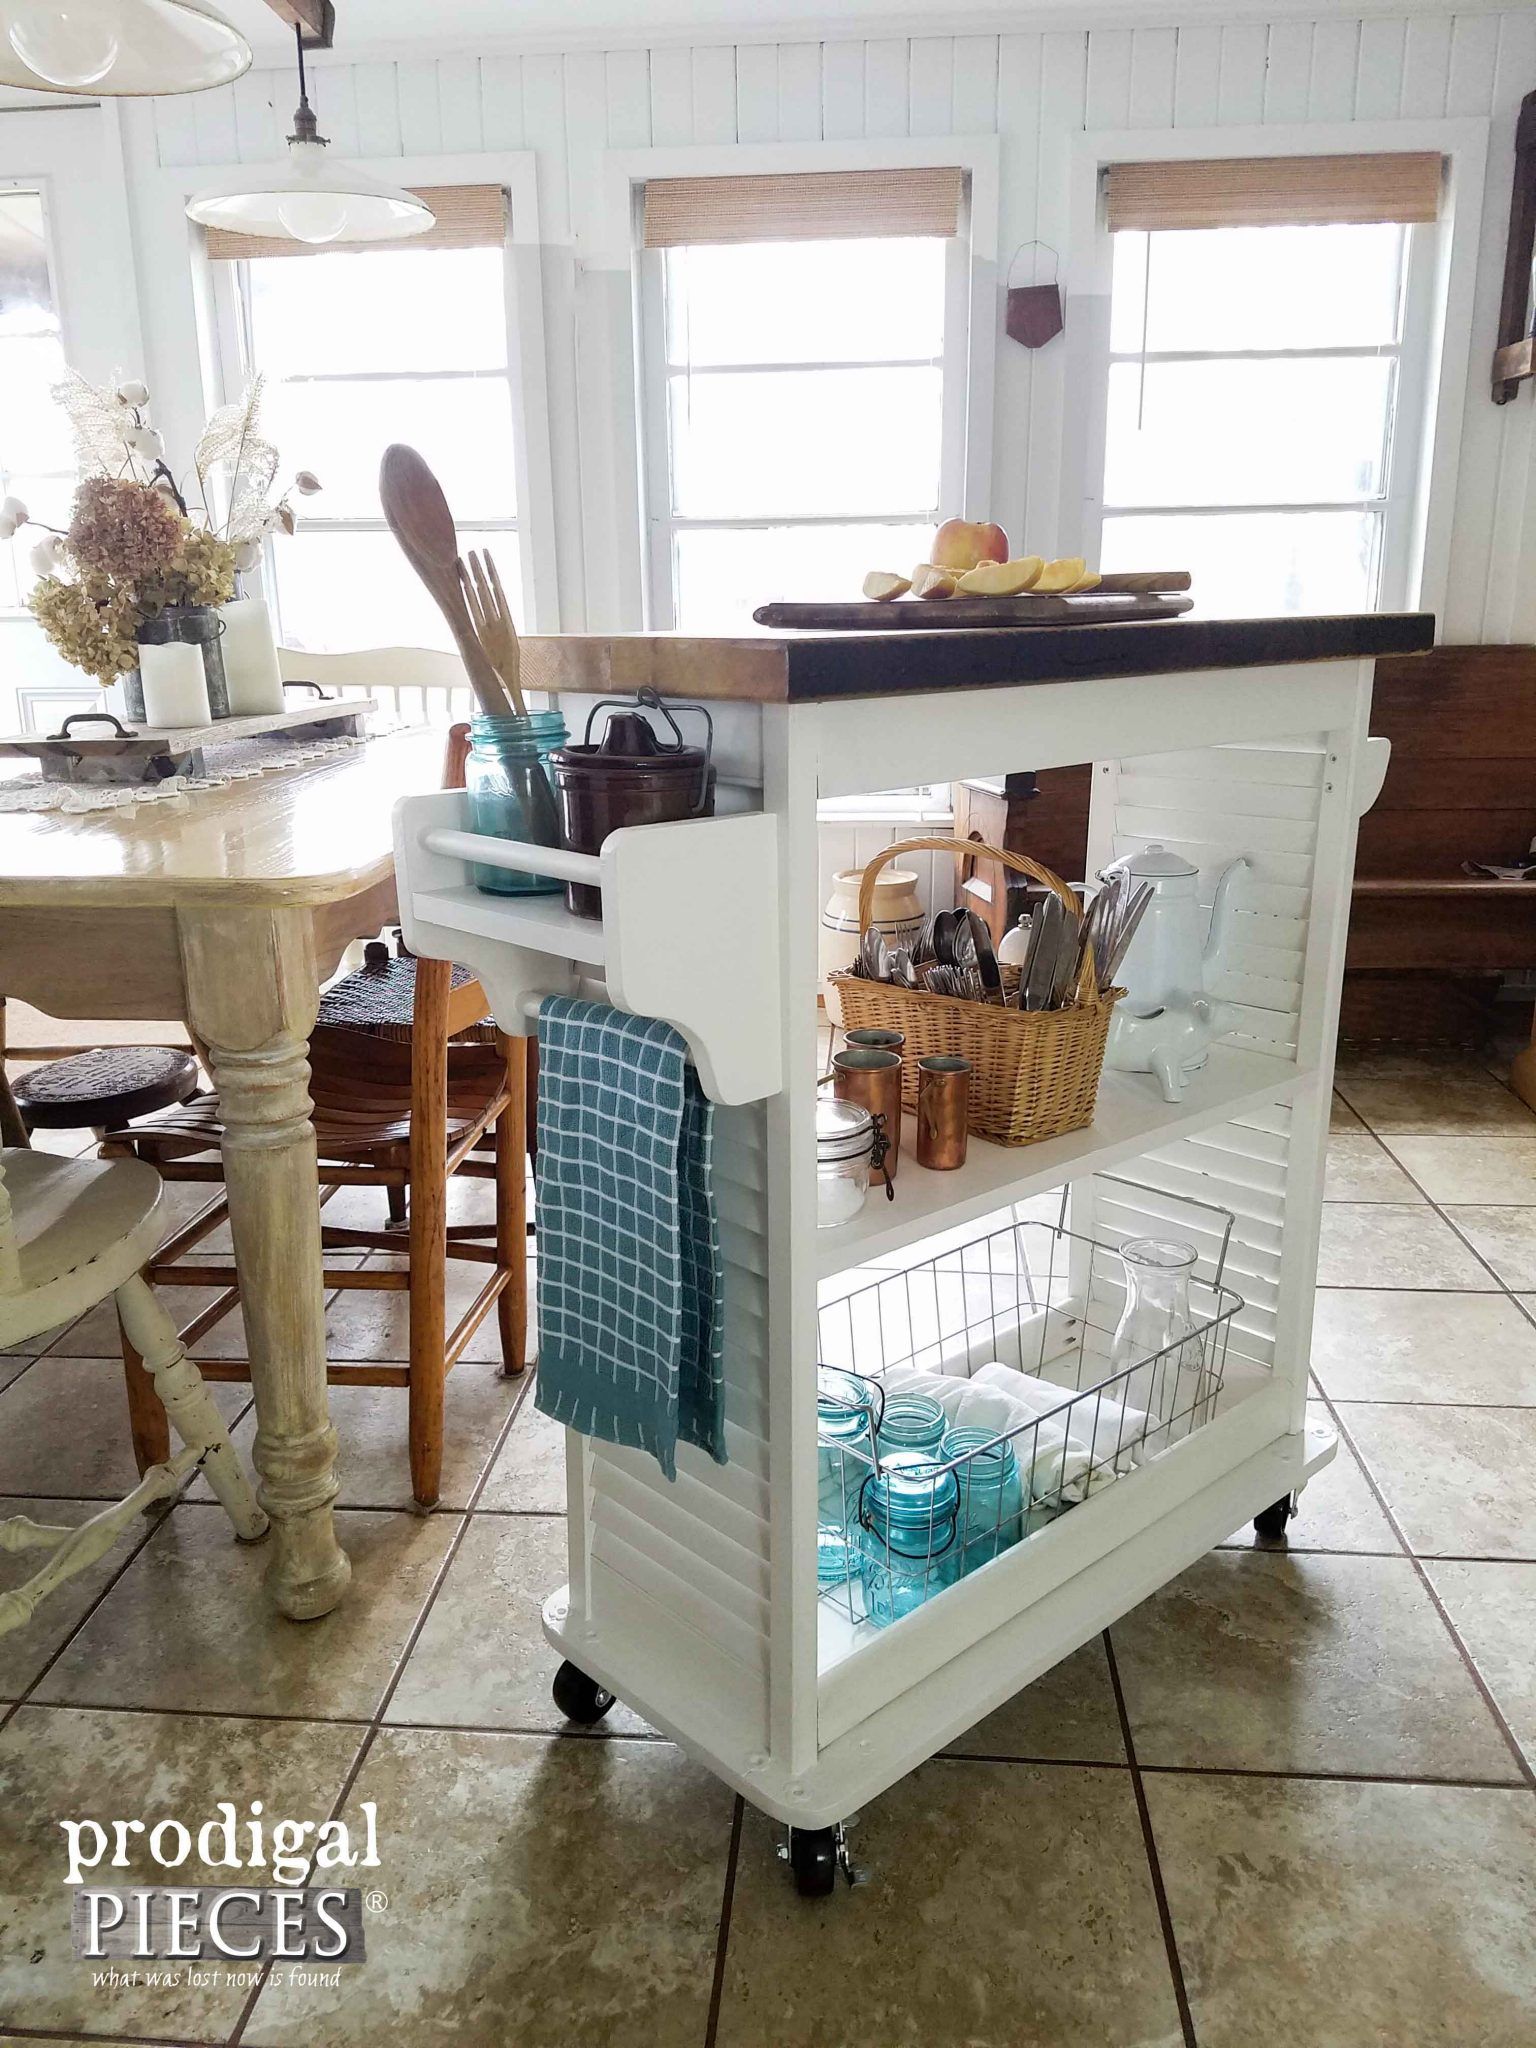 Kitchen Island Cart from Repurposed Materials - Prodigal Pieces